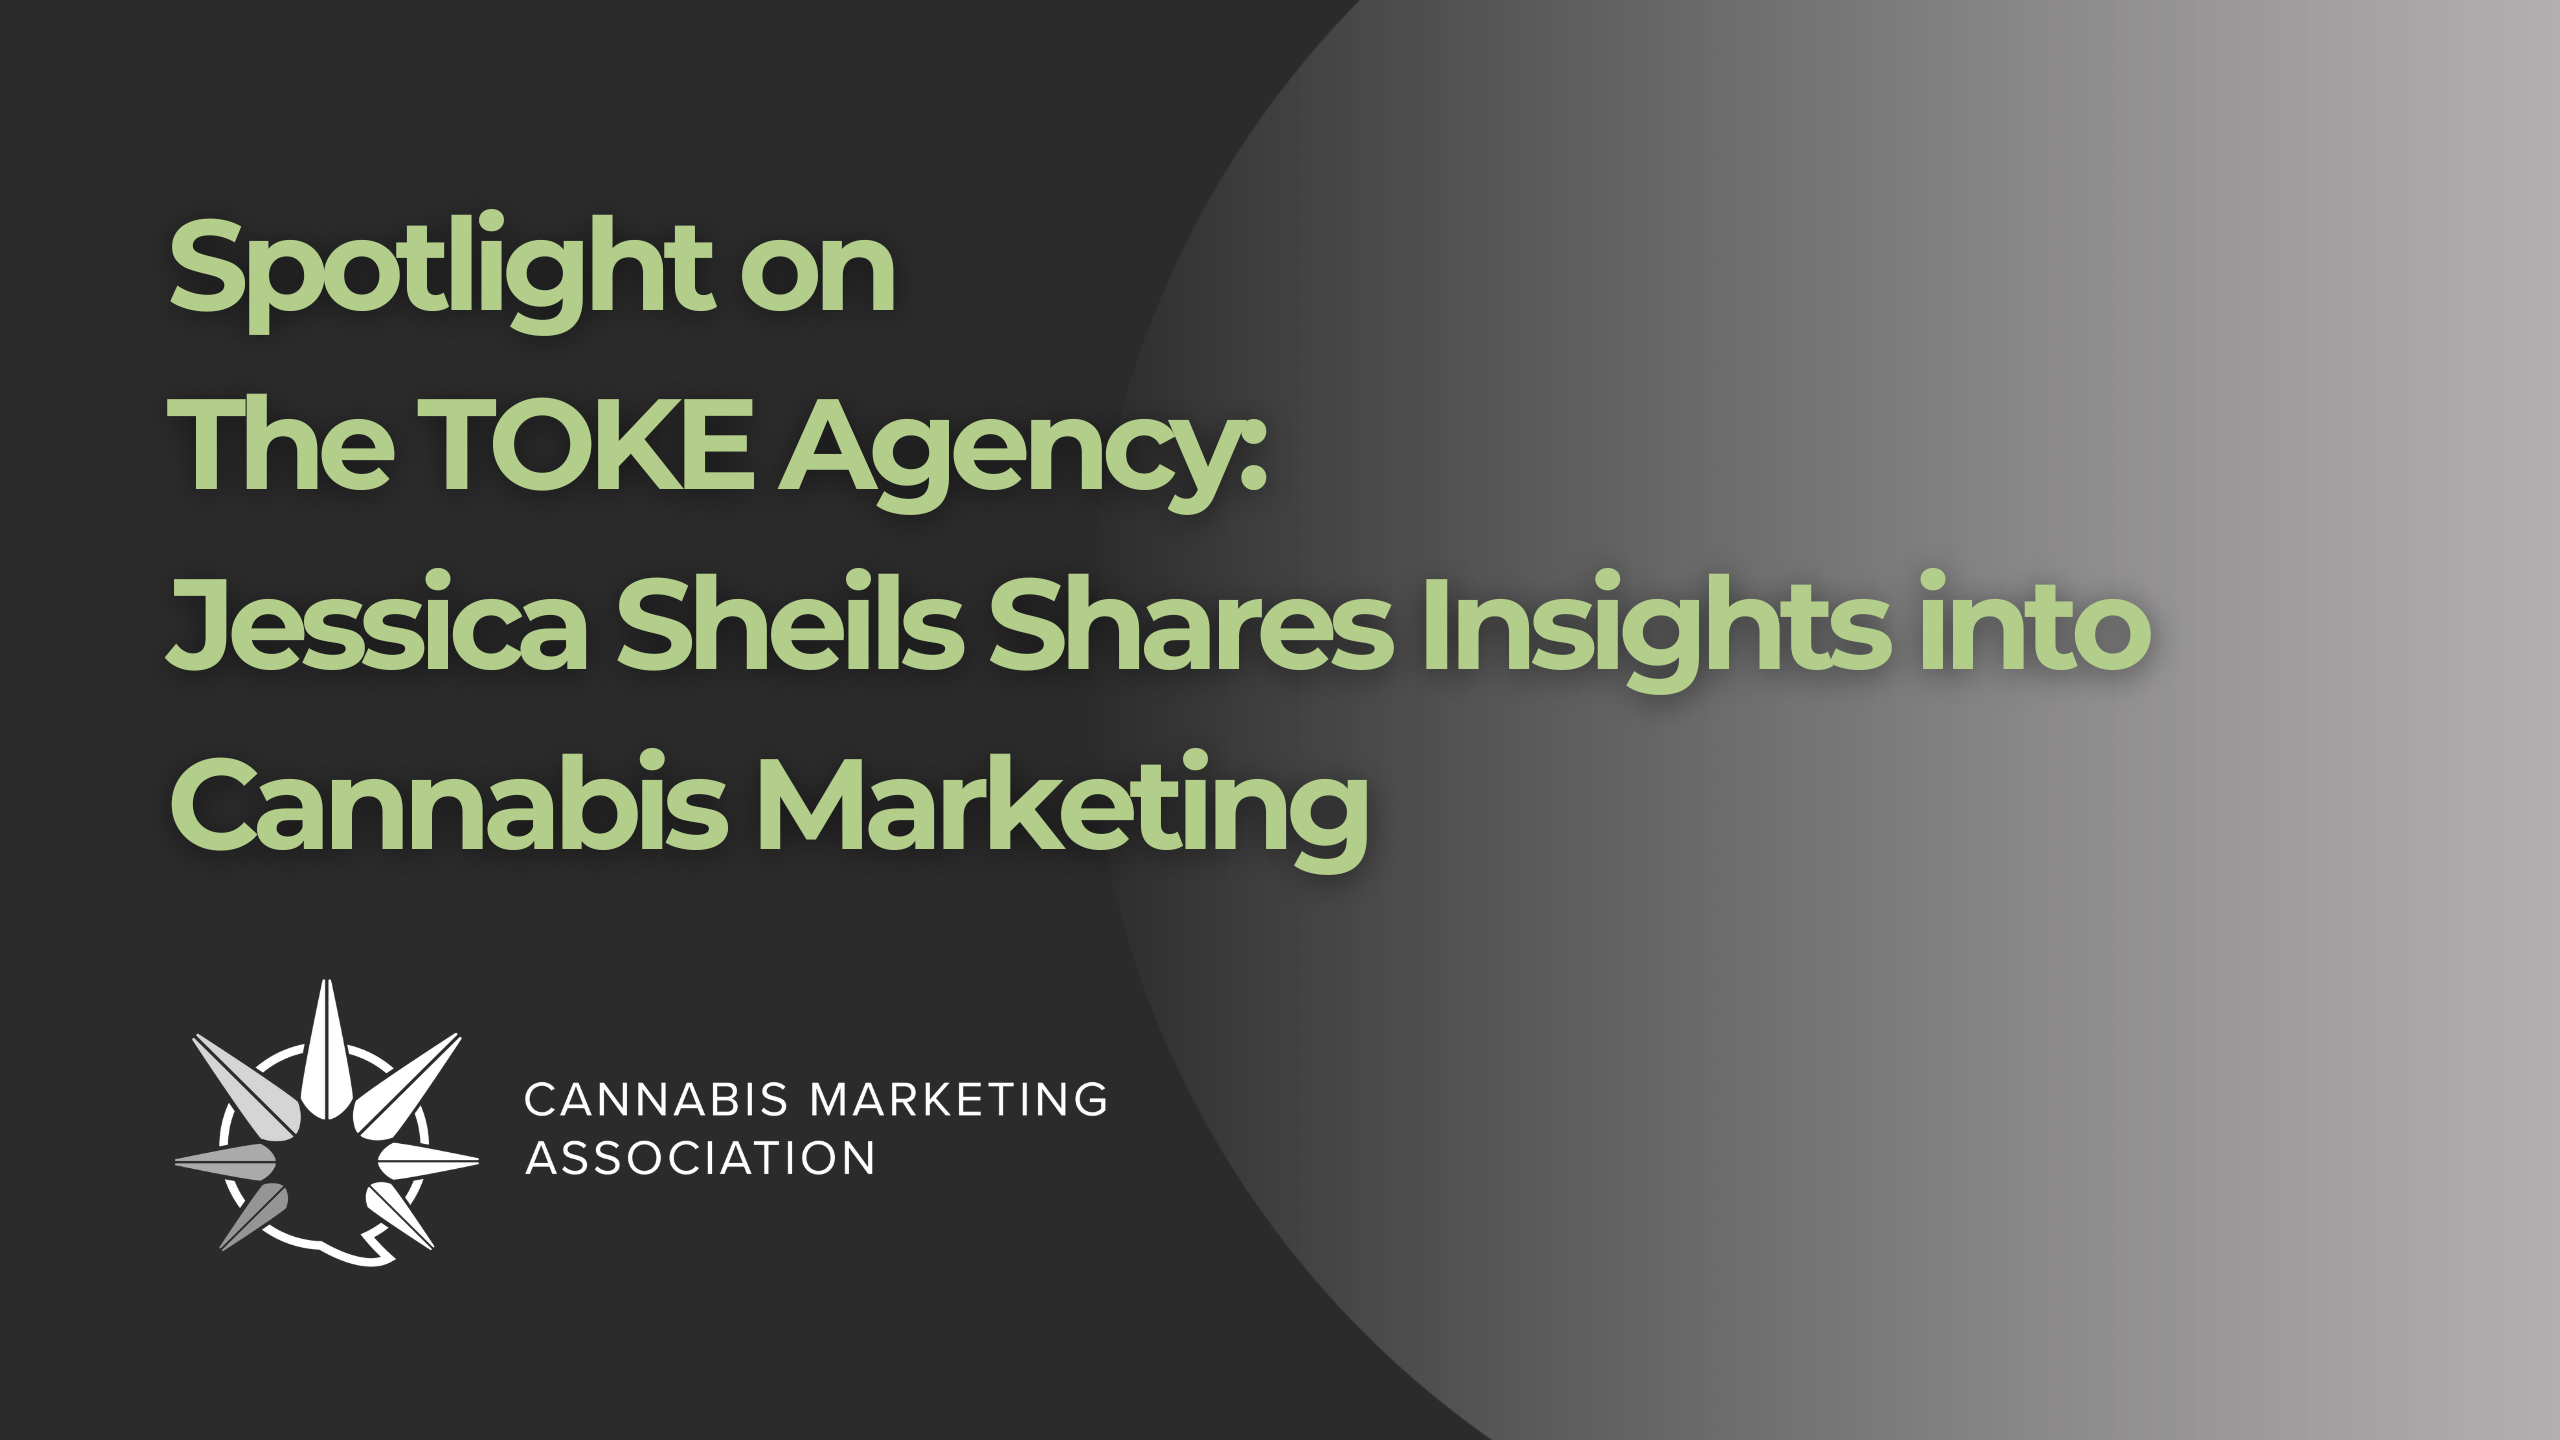 Spotlight on The TOKE Agency: Jessica Sheils Shares Insights into Cannabis Marketing